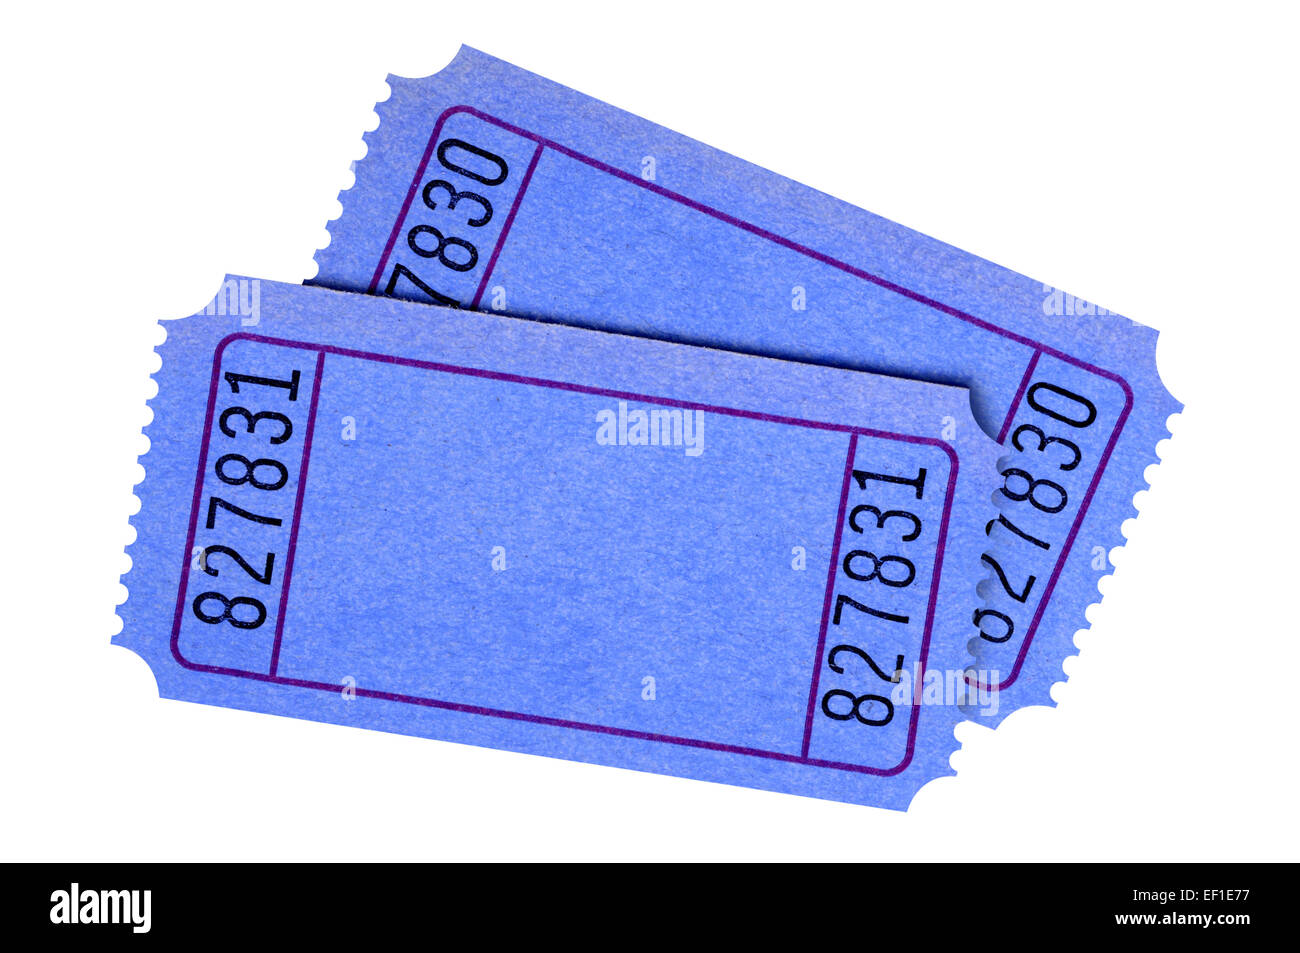 Pair of blank blue raffle tickets isolated on white background. Stock Photo